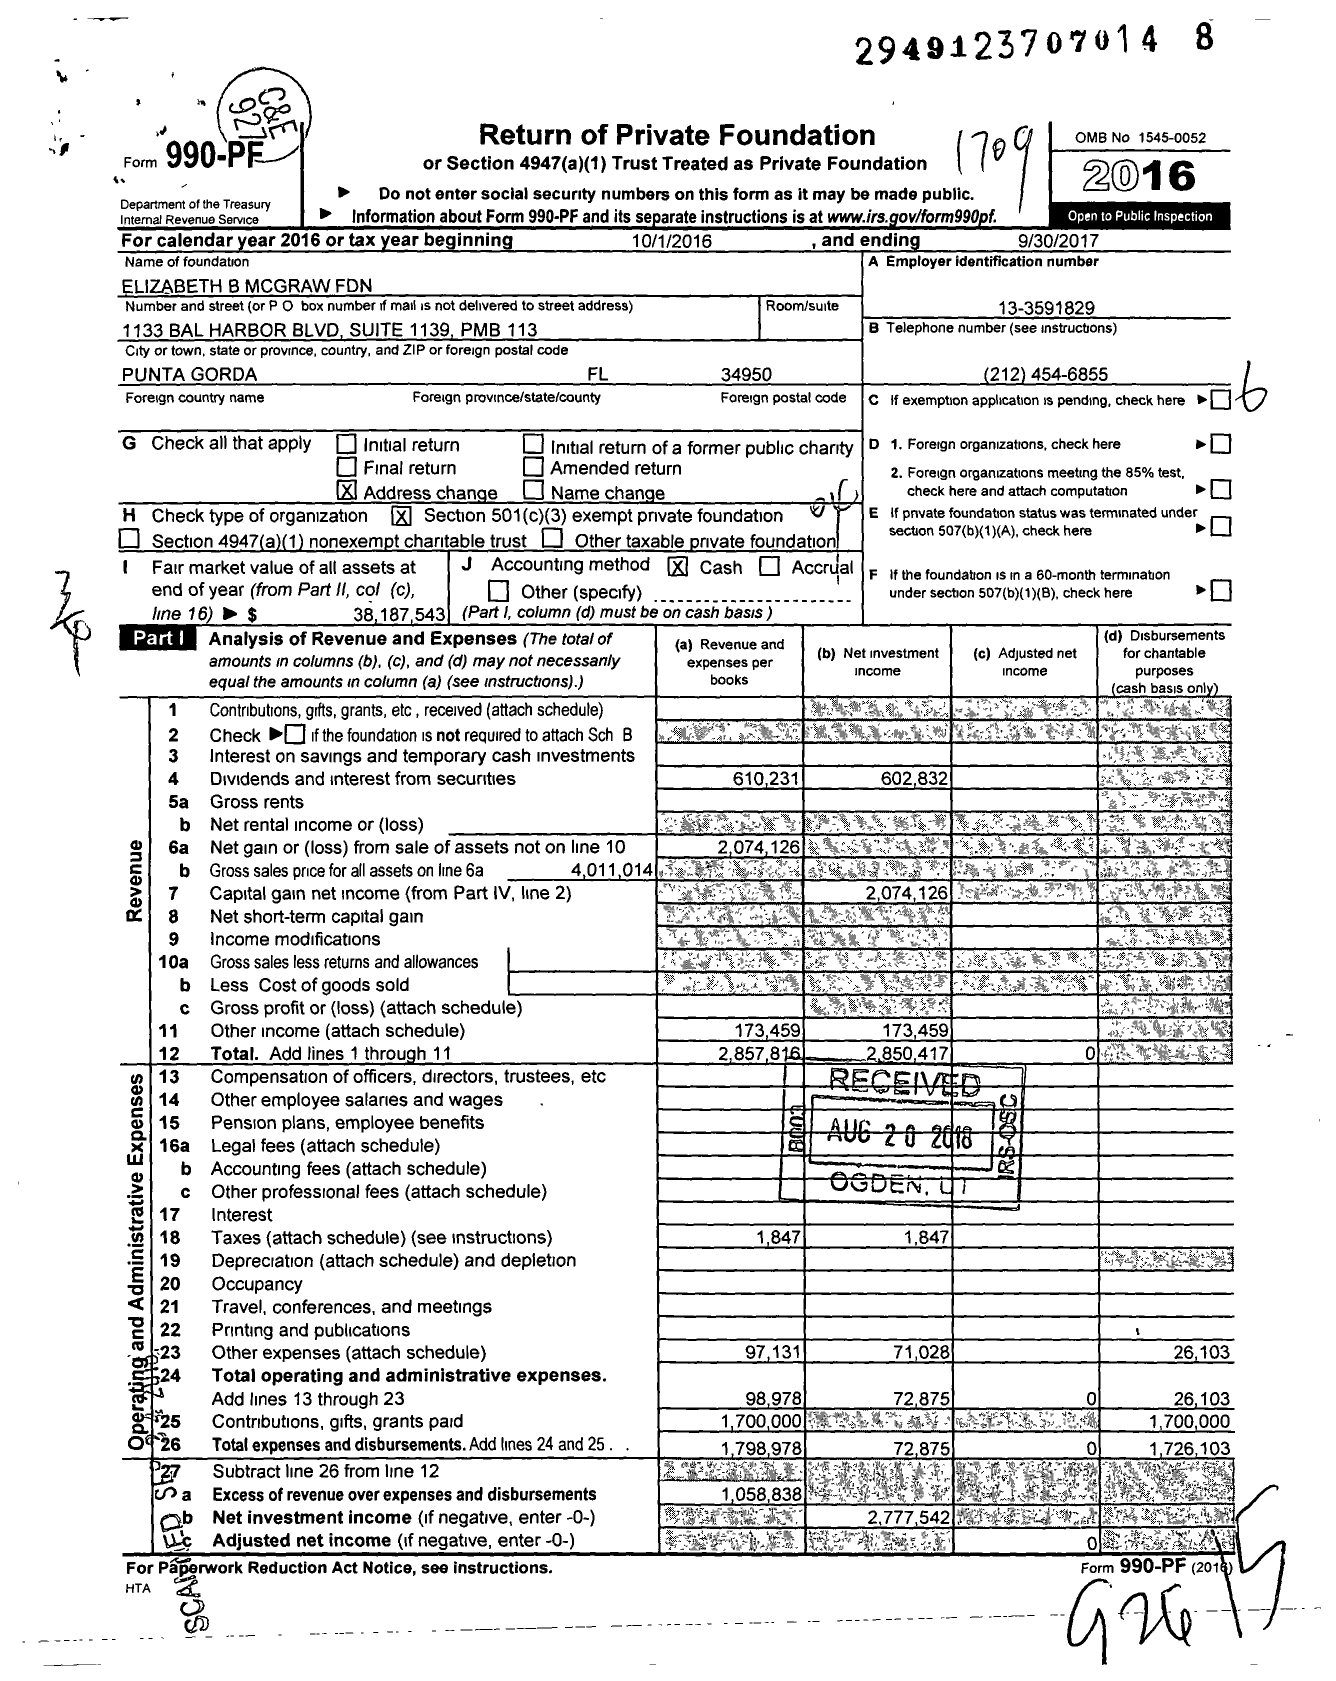 Image of first page of 2016 Form 990PF for Elizabeth B. McGraw Foundation